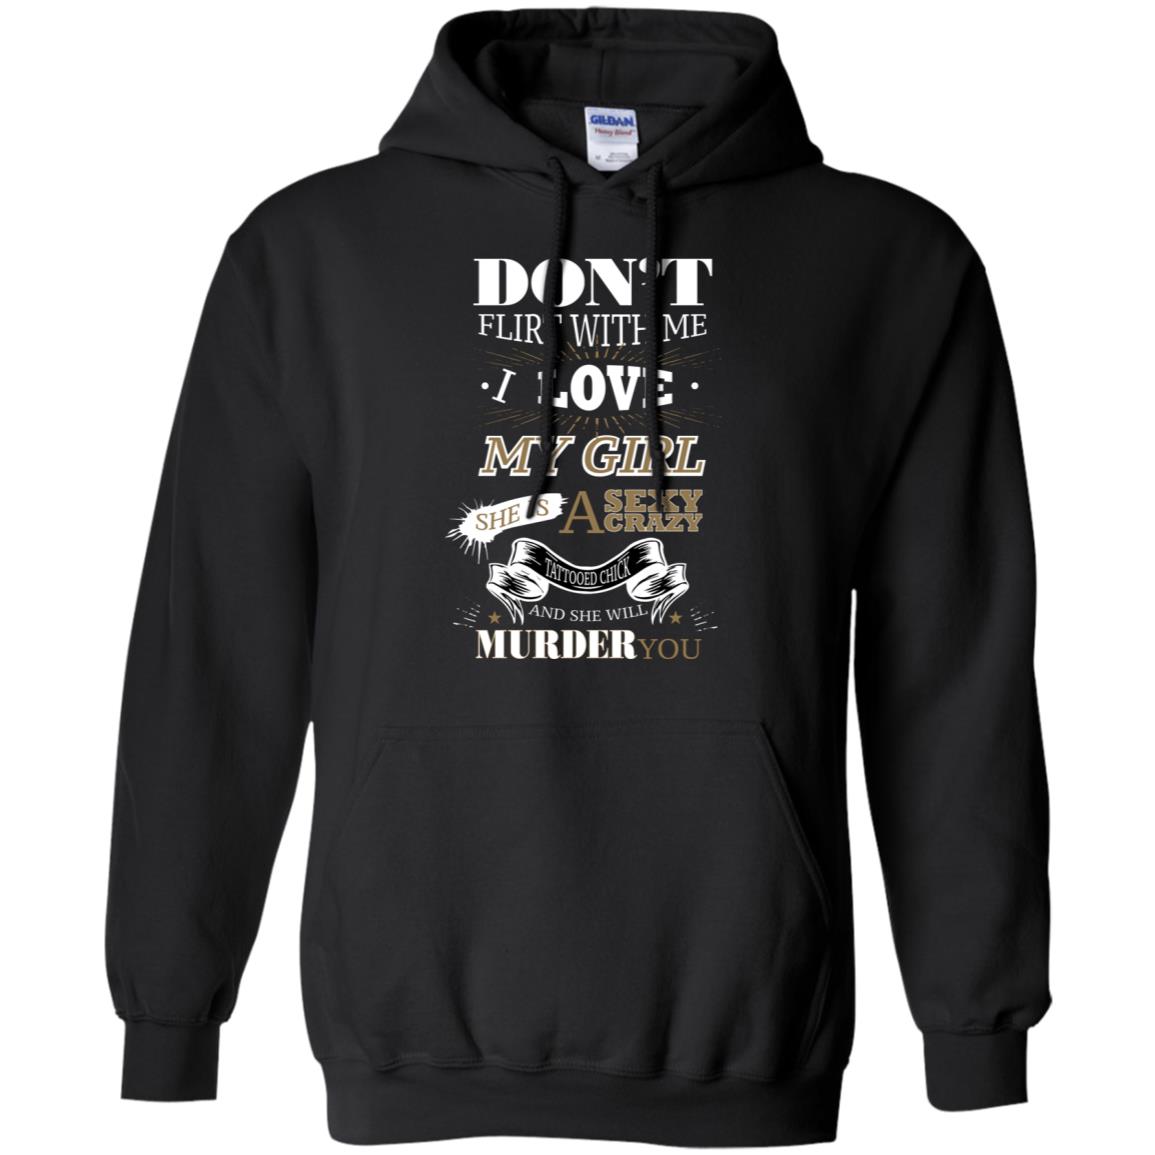 Don't Flirt With Me I Love My Girl She Is A Sexy Crazy Tattooed Chick And She Shirt For MensG185 Gildan Pullover Hoodie 8 oz.